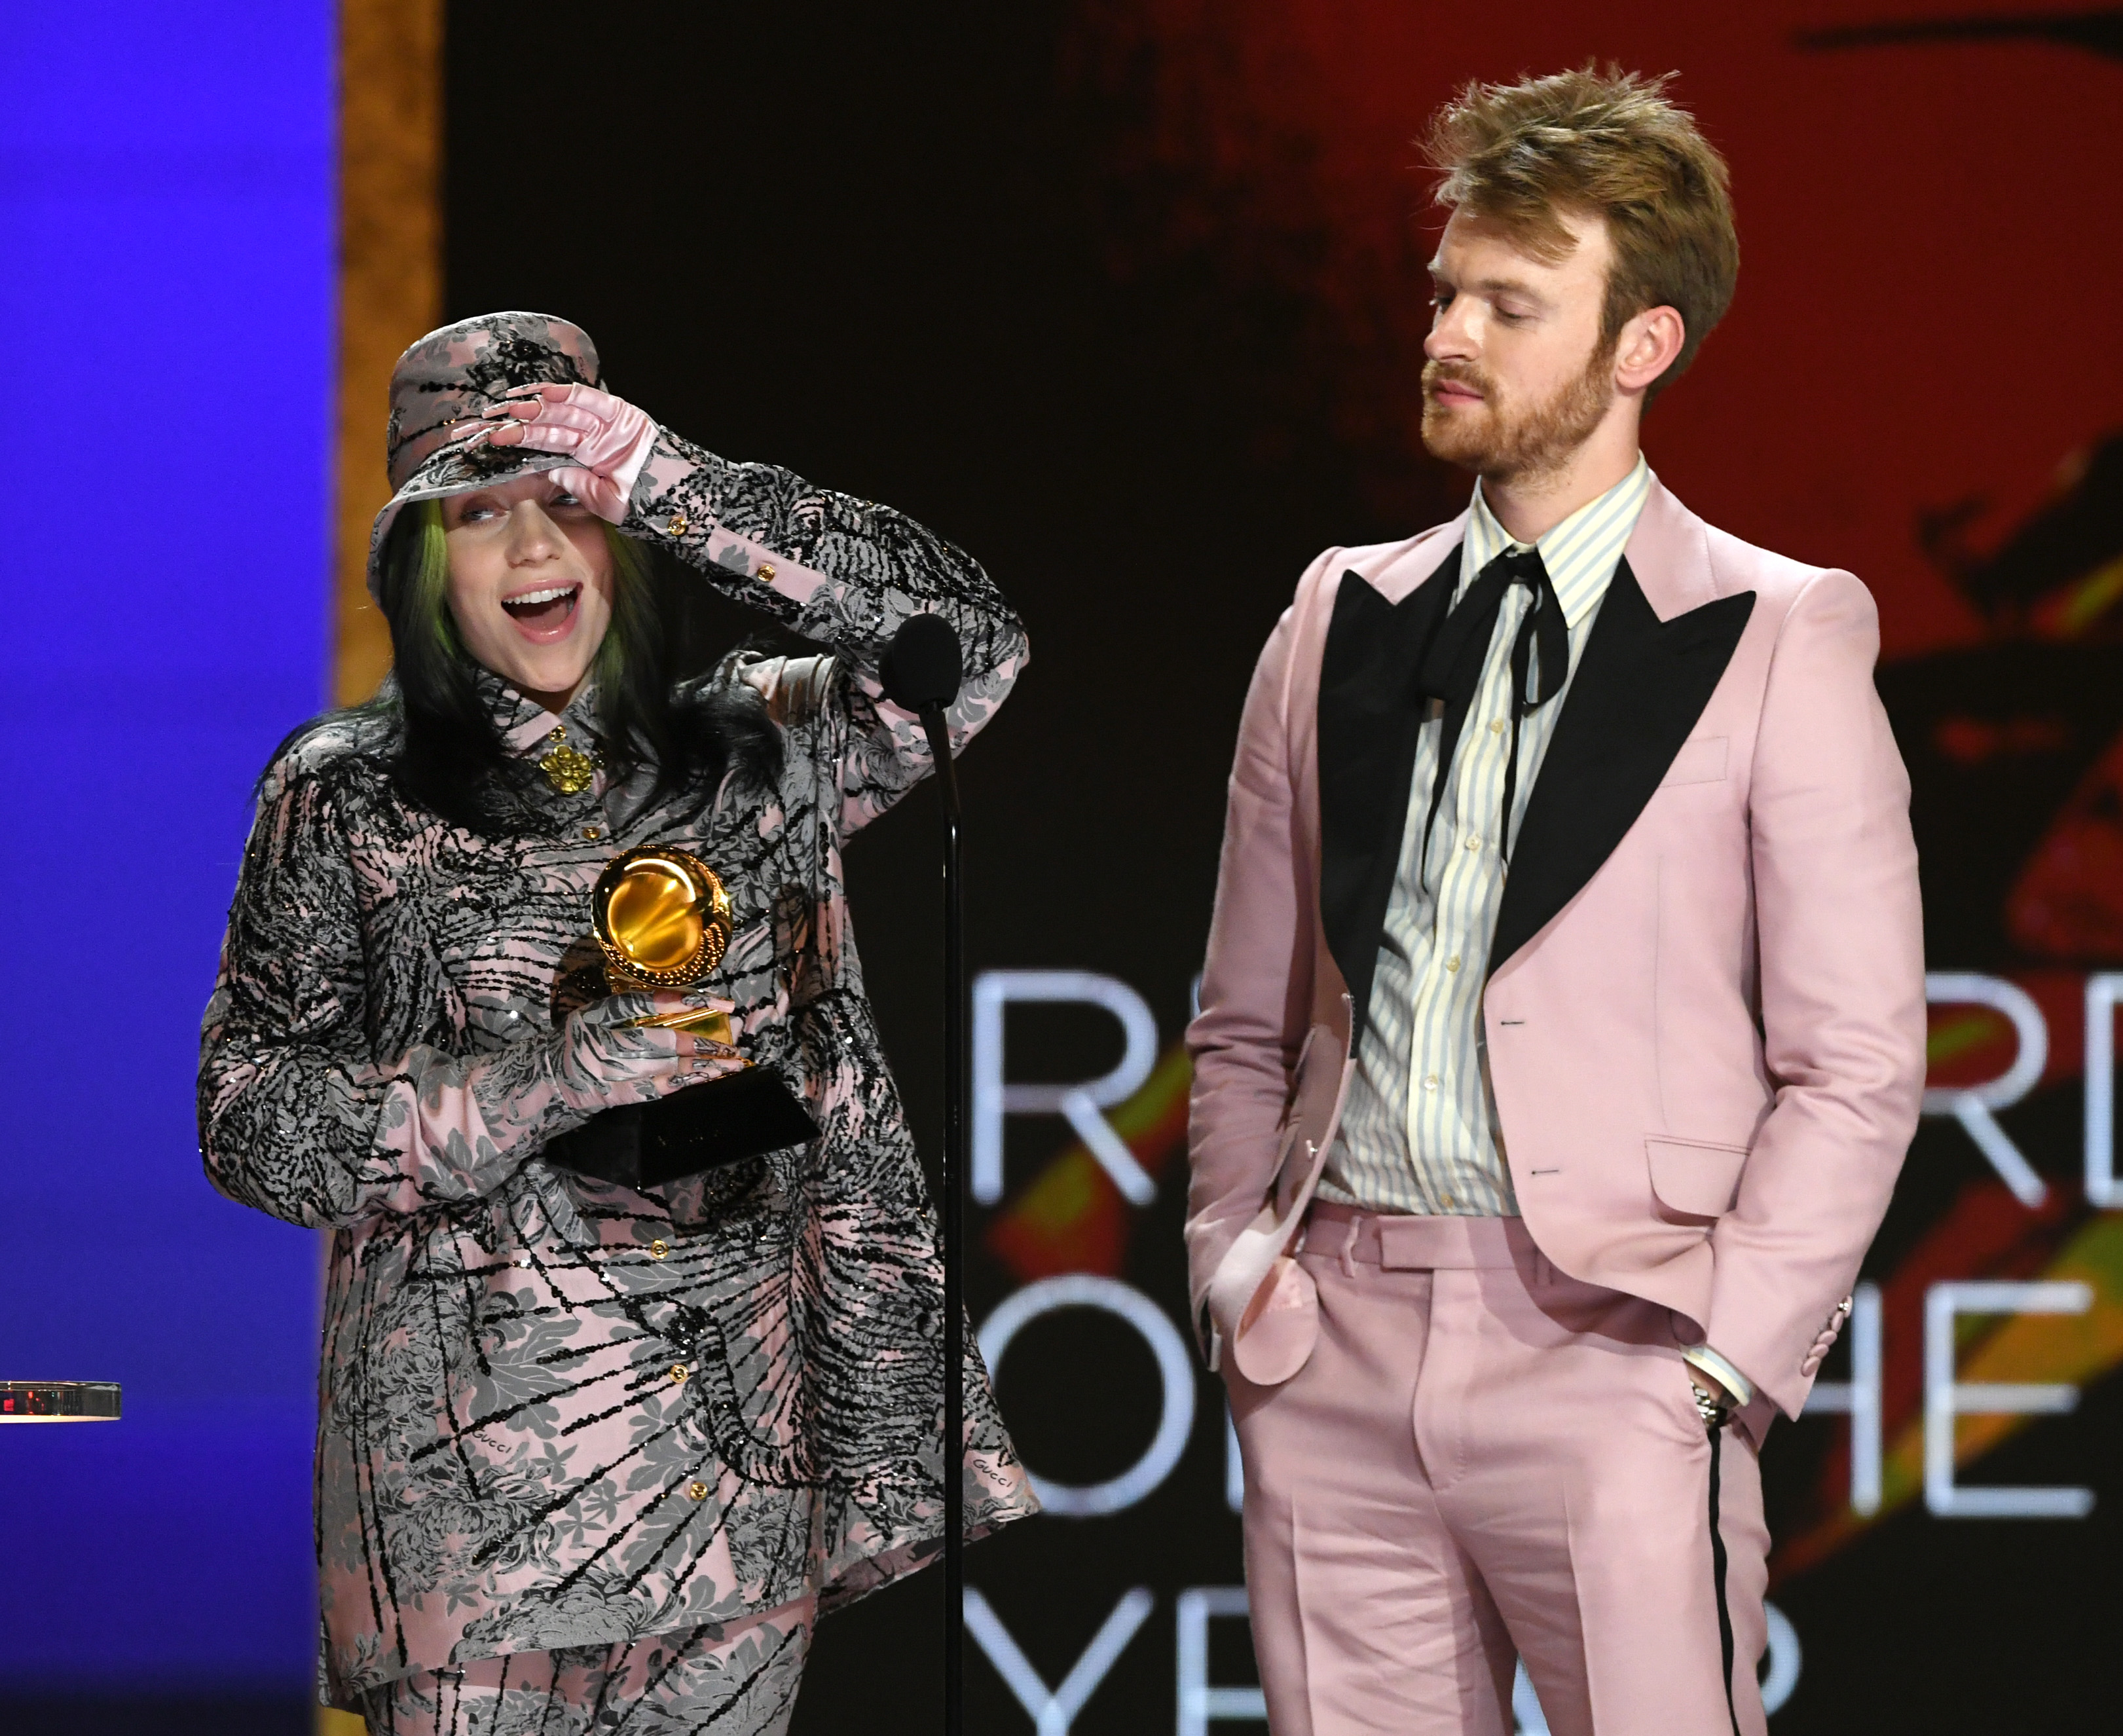 LOS ANGELES, CALIFORNIA - MARCH 14: (L-R) Billie Eilish and FINNEAS accept the Record of the Year award for 'Everything I Wanted' onstage during the 63rd Annual GRAMMY Awards at Los Angeles Convention Center on March 14, 2021 in Los Angeles, California. (Photo by Kevin Winter/Getty Images for The Recording Academy) (Getty Images for The Recording A—2021 Recording Academy)